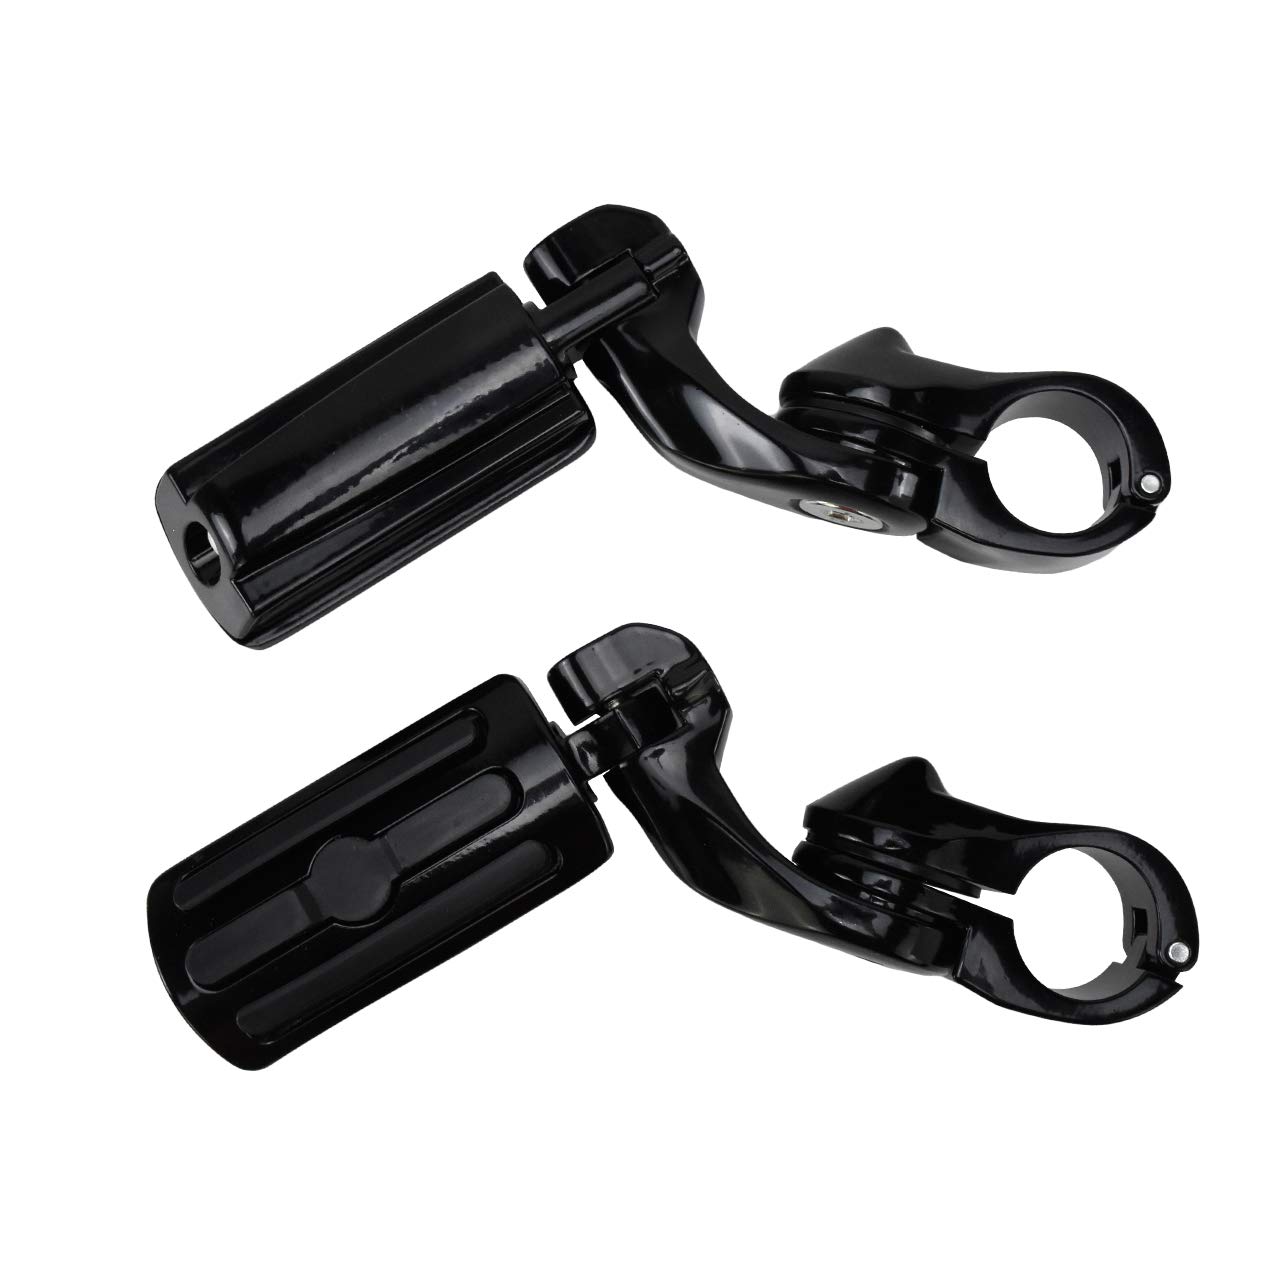 HDBUBALUS Adjustable Highway Pegs Short Angled Mount Foot Pegs Fit for Harley Electra Road King Street Glide 1 14" 32mm Engine Guard Bars von HDBUBALUS